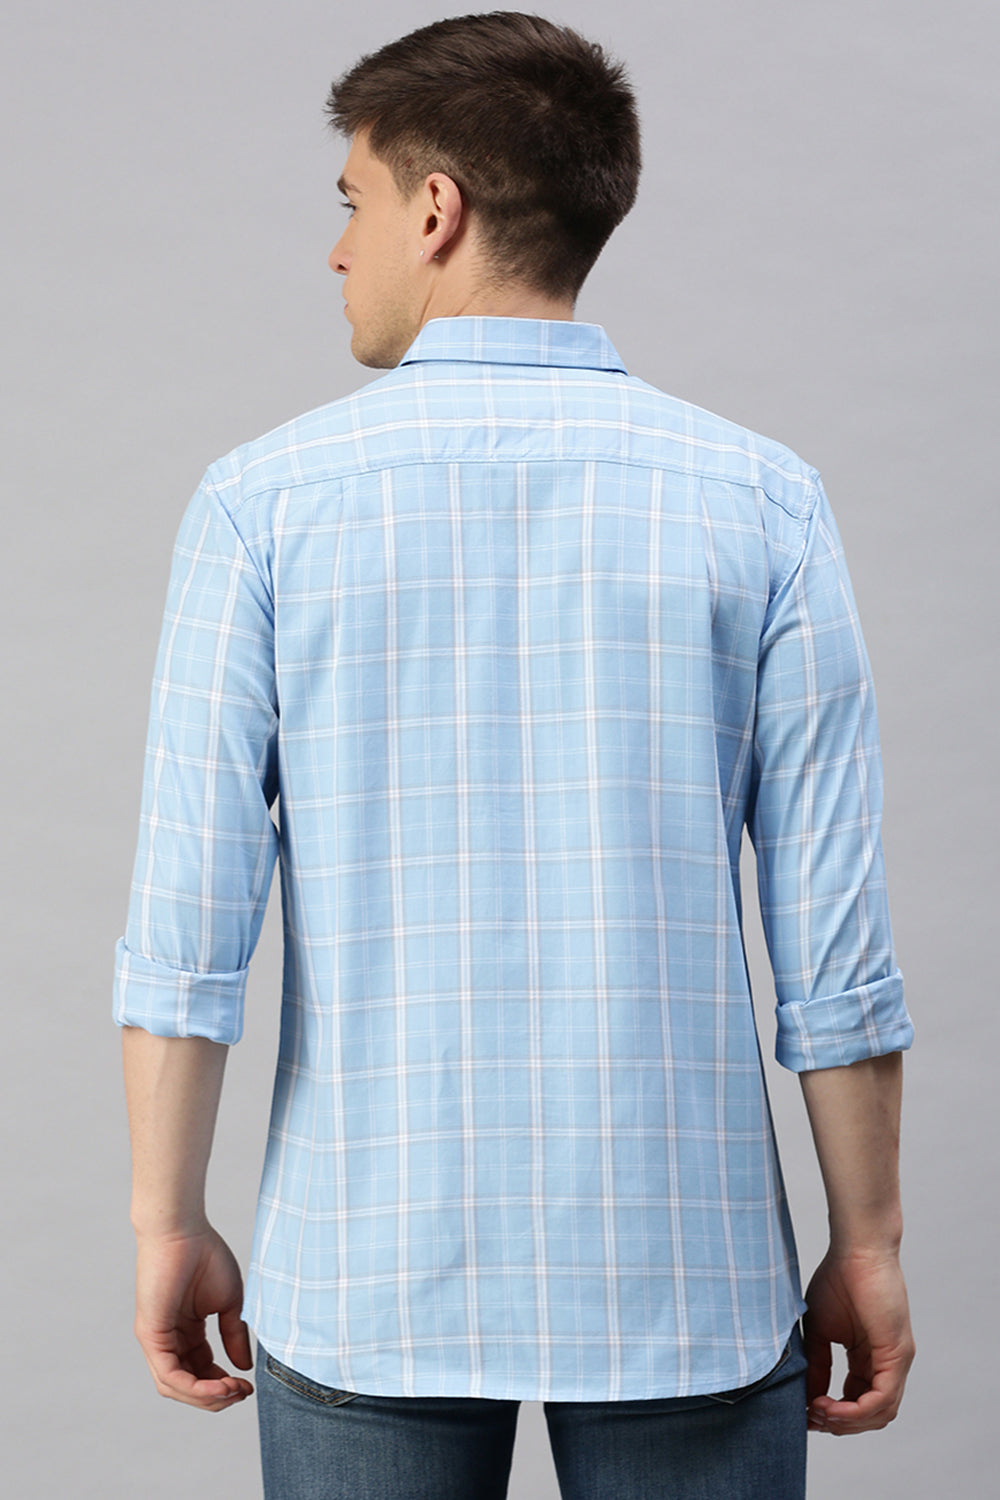 Classic Polo Men's Cotton Full Sleeve Checked Slim Fit Polo Neck Light Blue Color Woven Shirt | So1-95 B